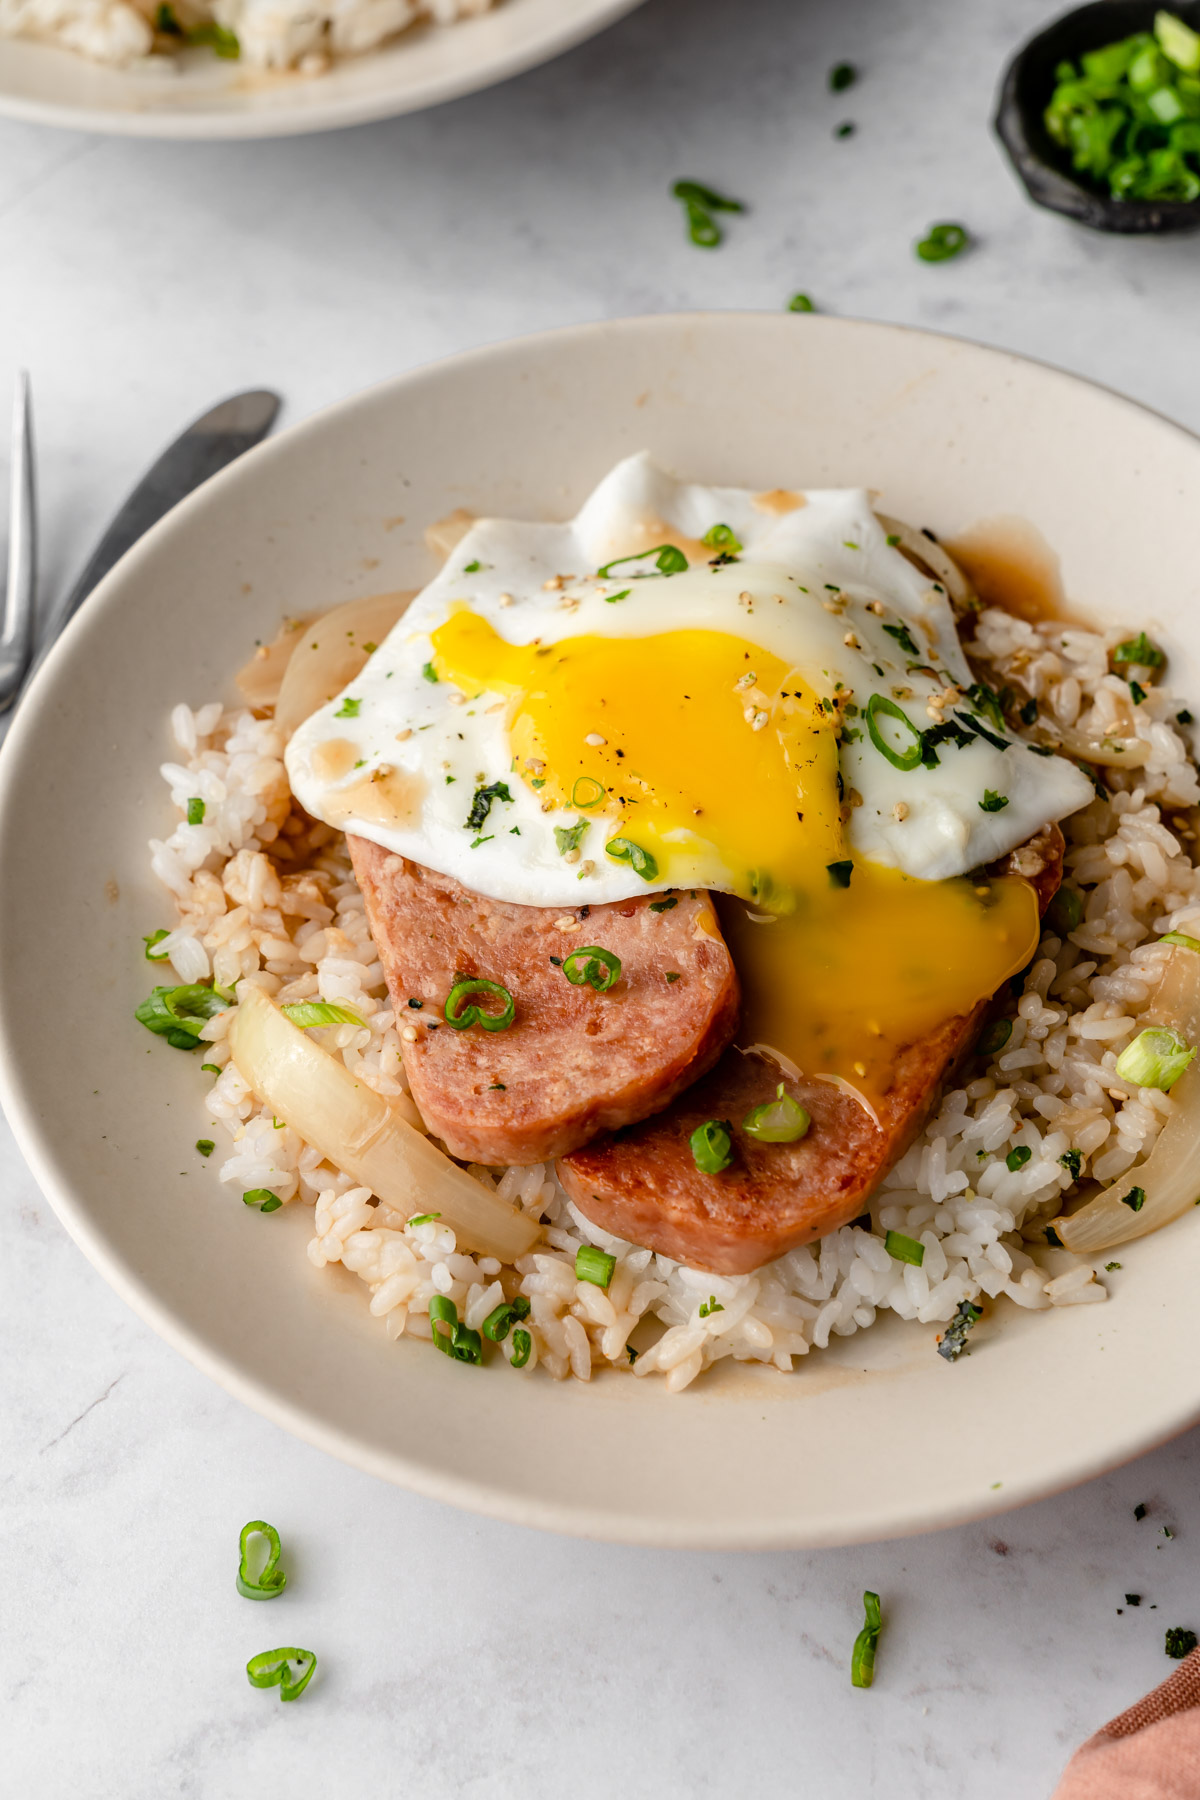 A burst fried egg on top of Spam, rice, and gravy for Spam Loco Moco.